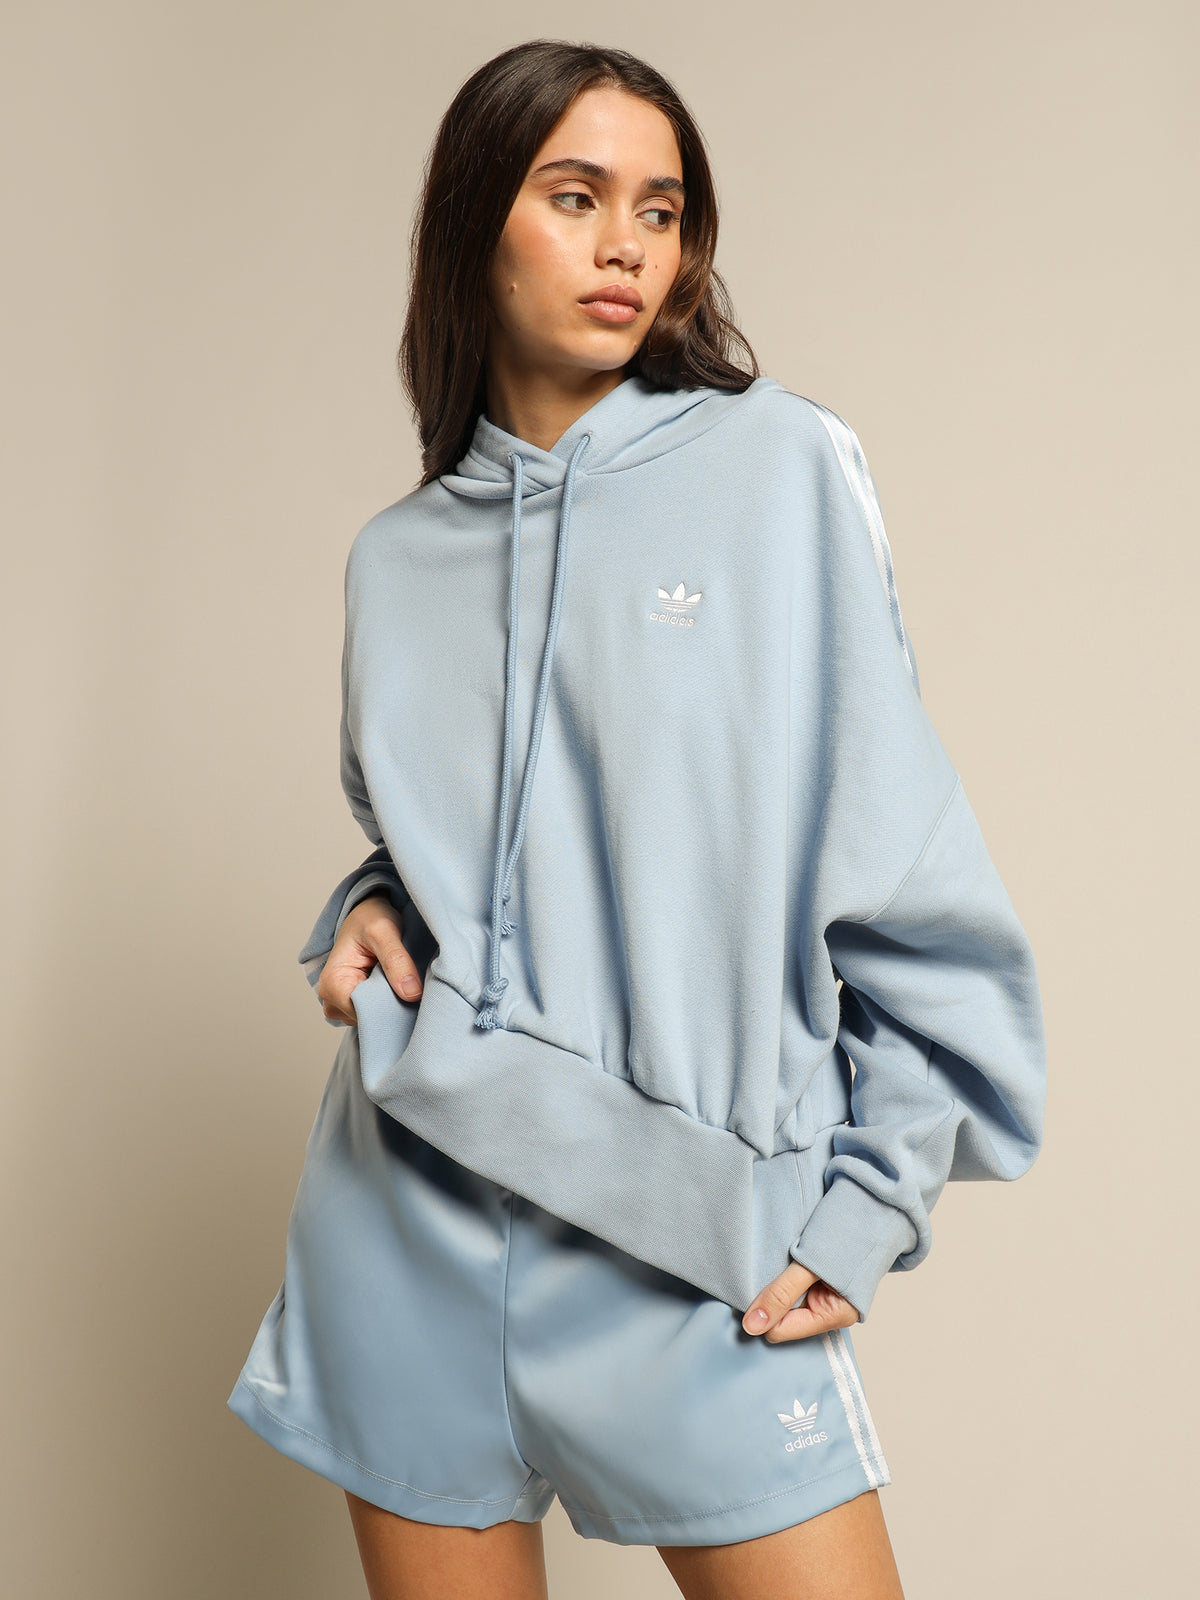 Satin Tape Cropped Hoodie in Ambient Sky